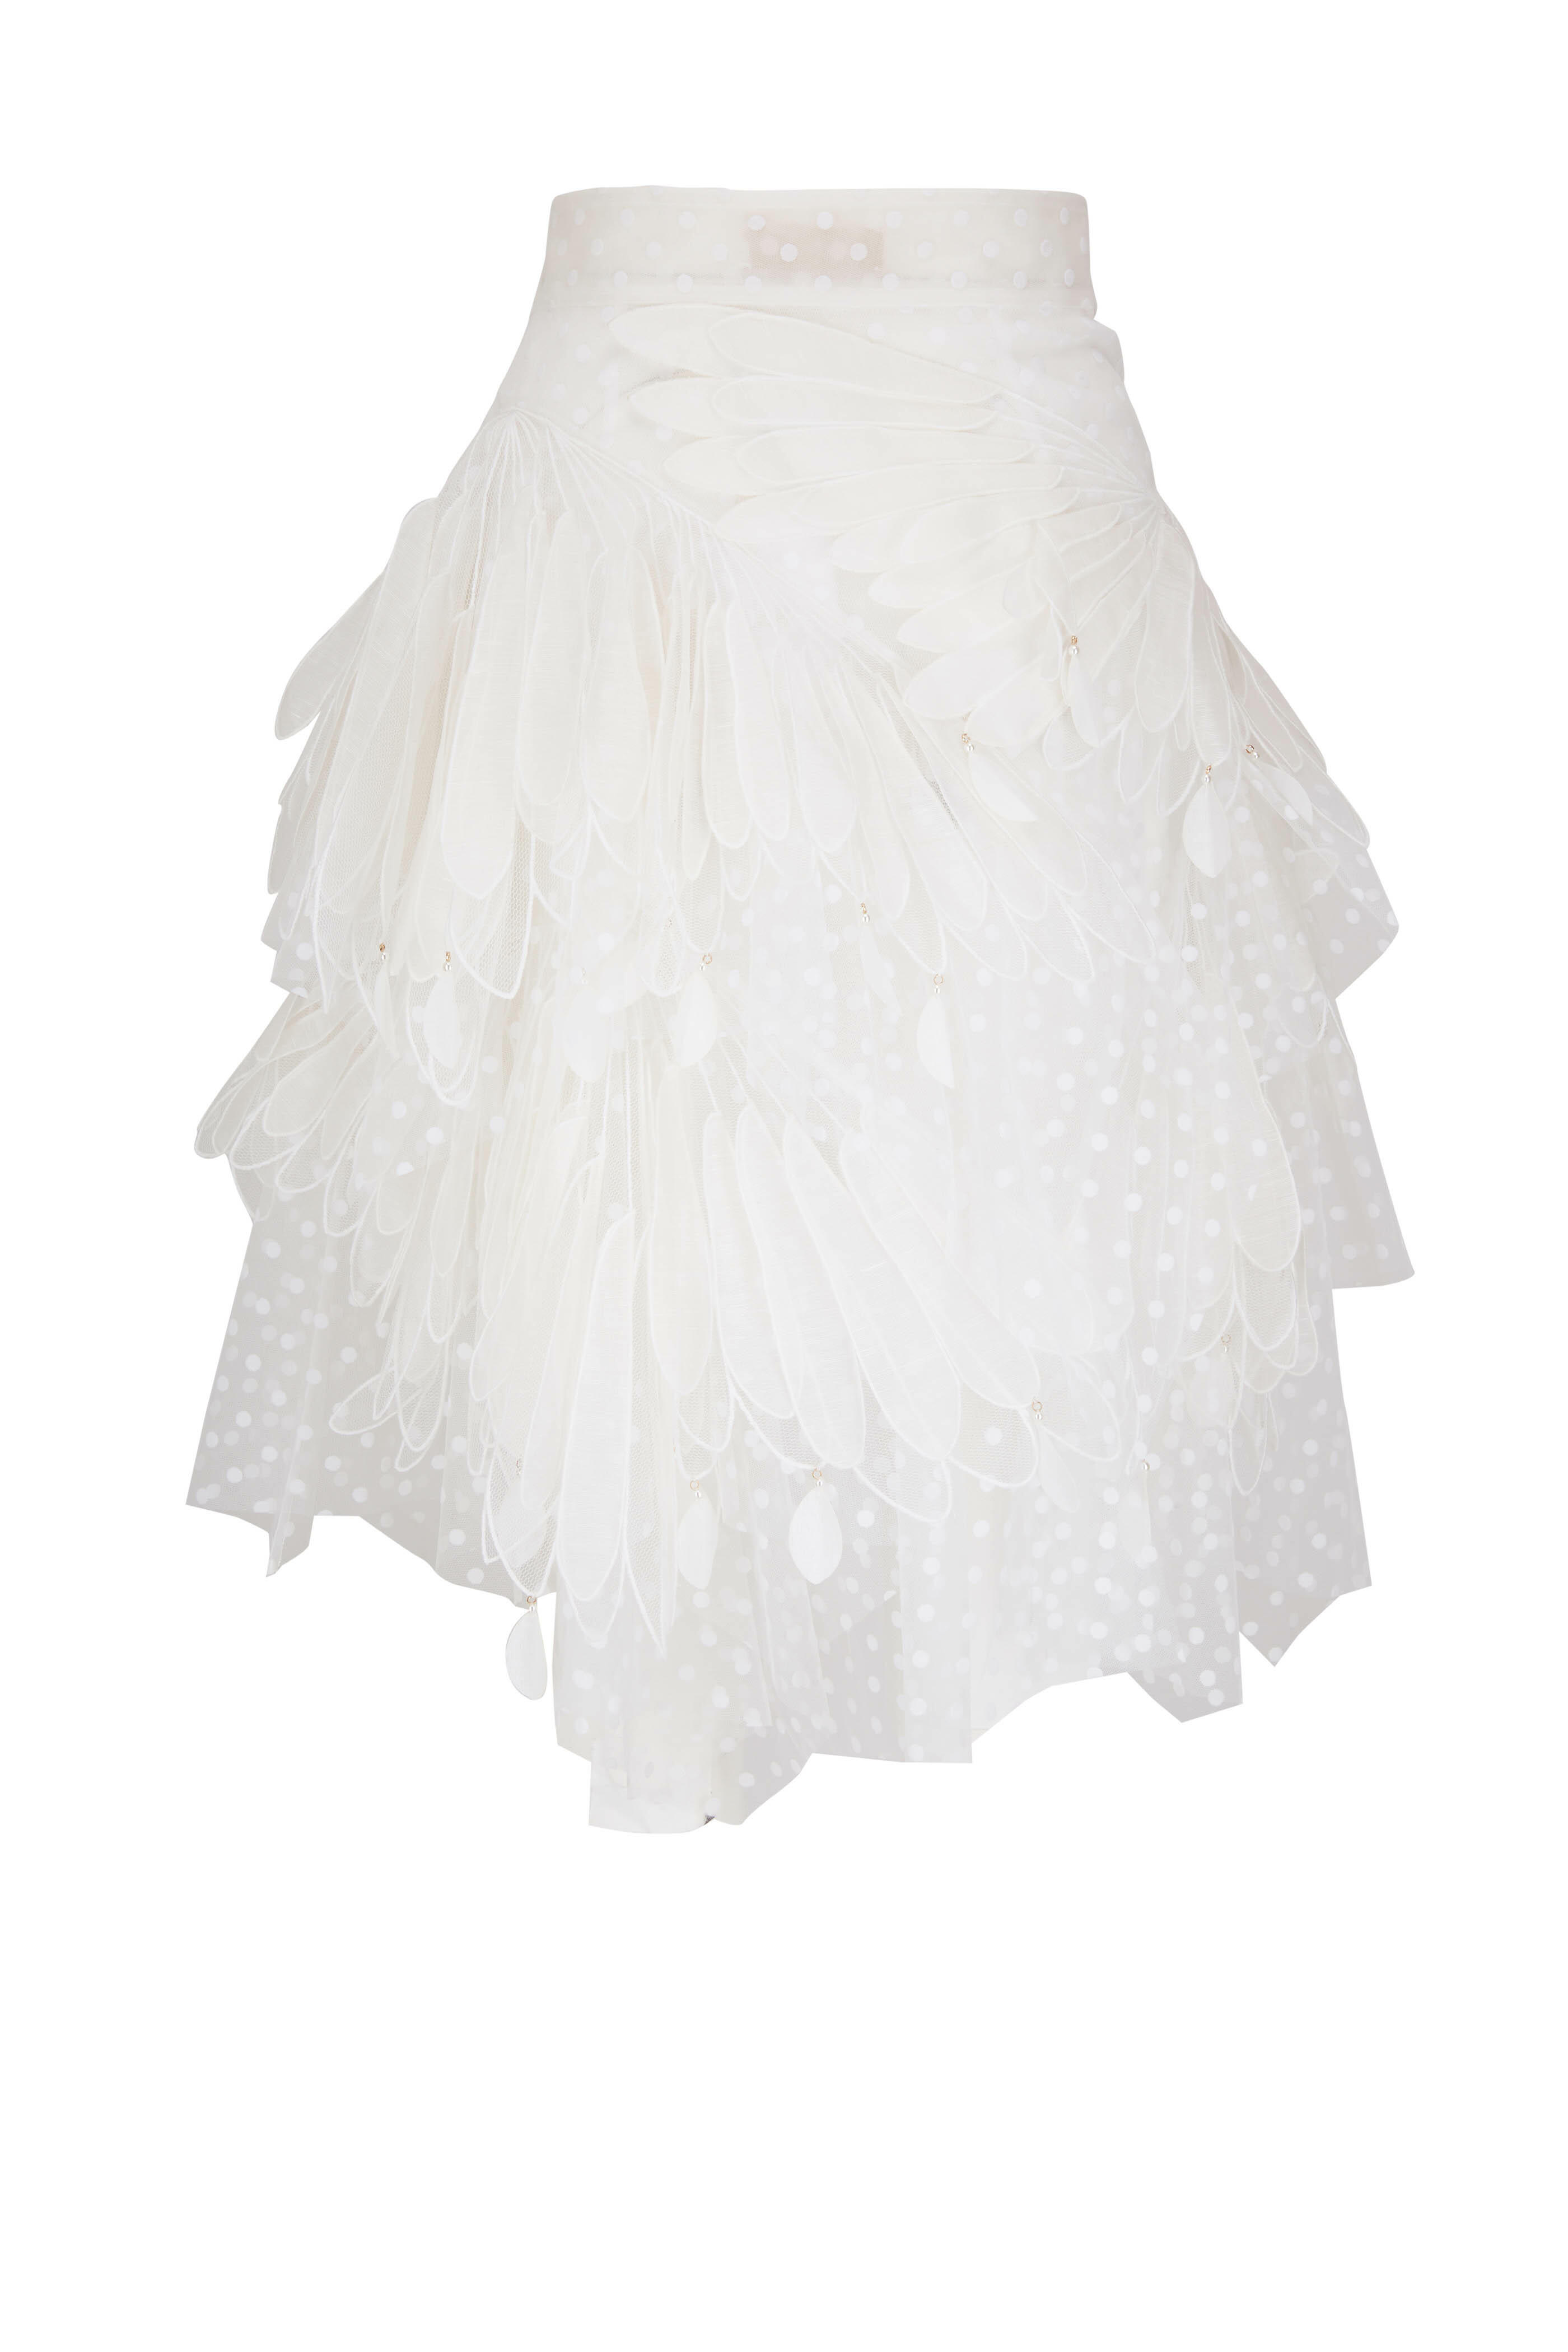 Be The Drama White Feather Trim Skirt – Shop the Mint